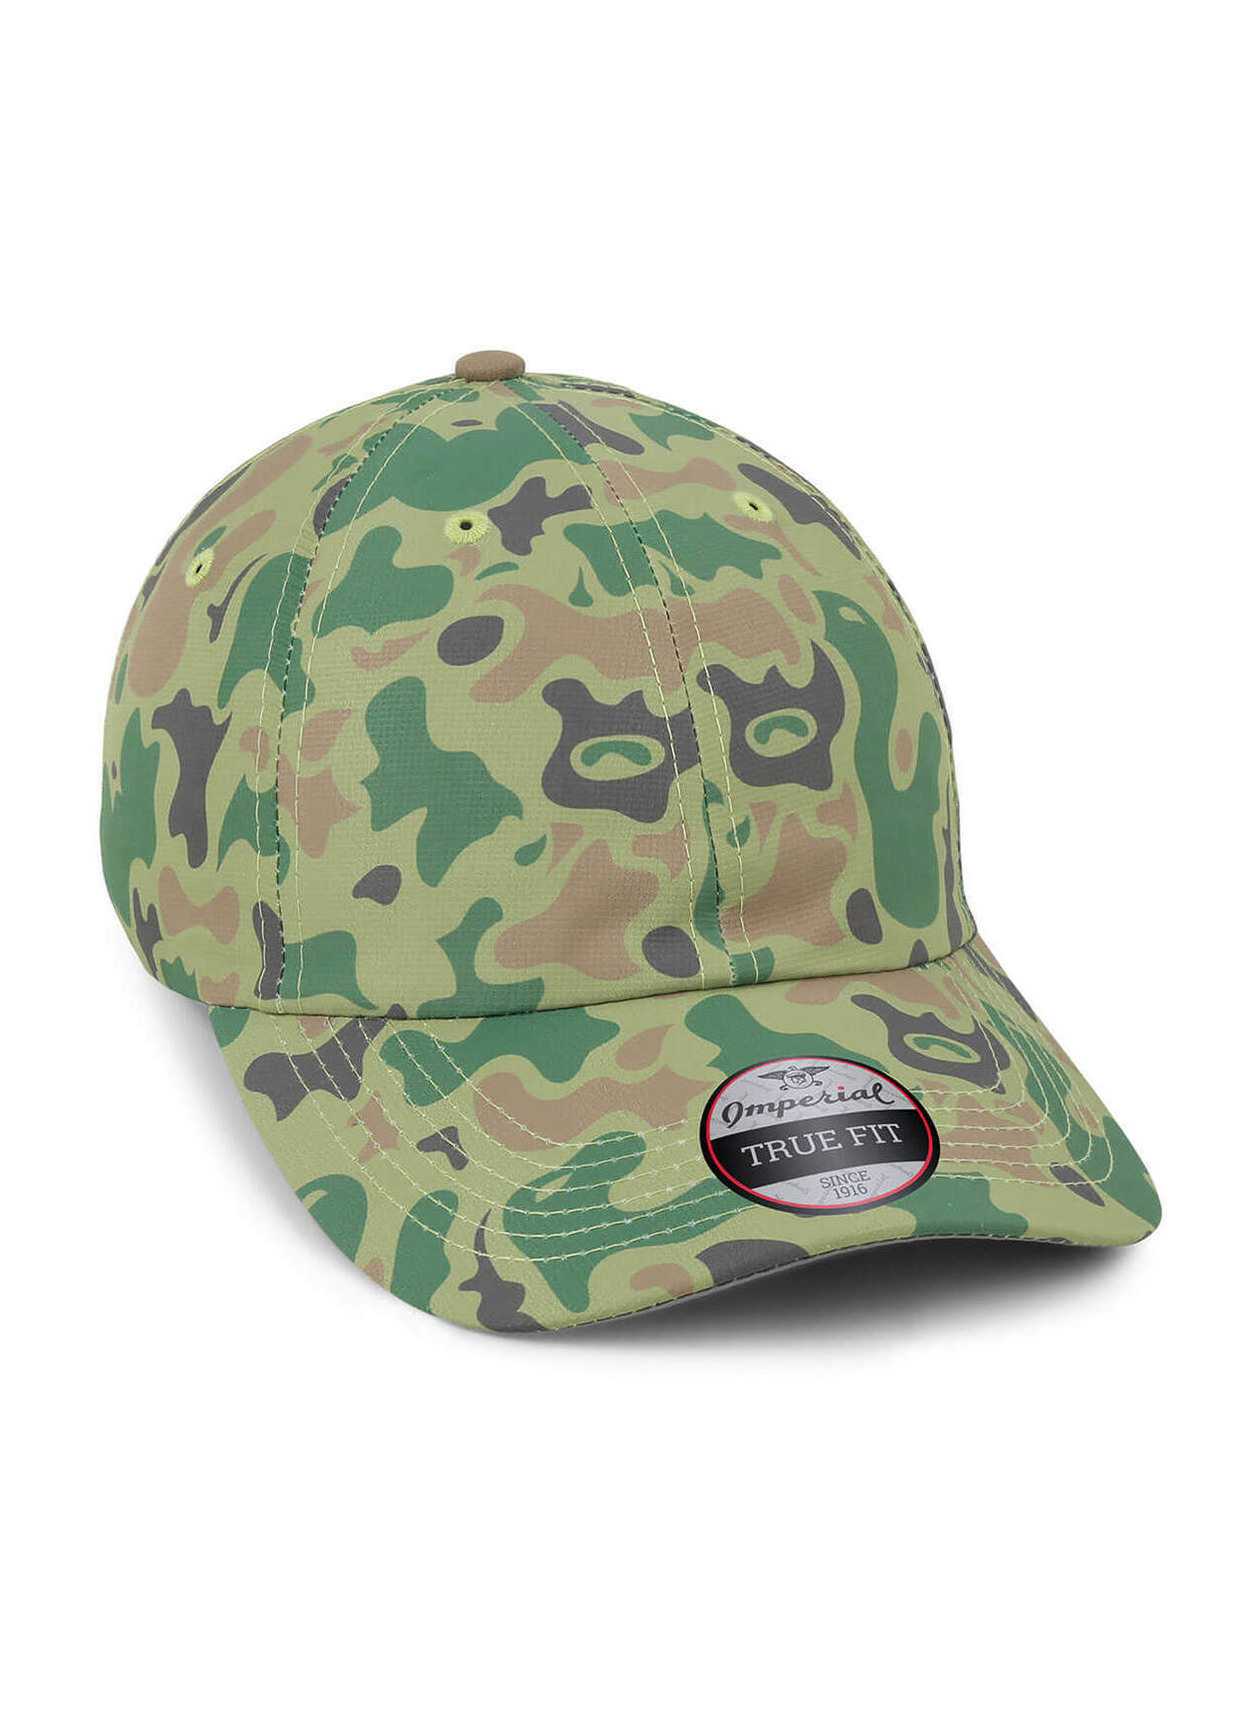 Imperial Green Duck Camo The Alter Ego Pattered Performance Hat